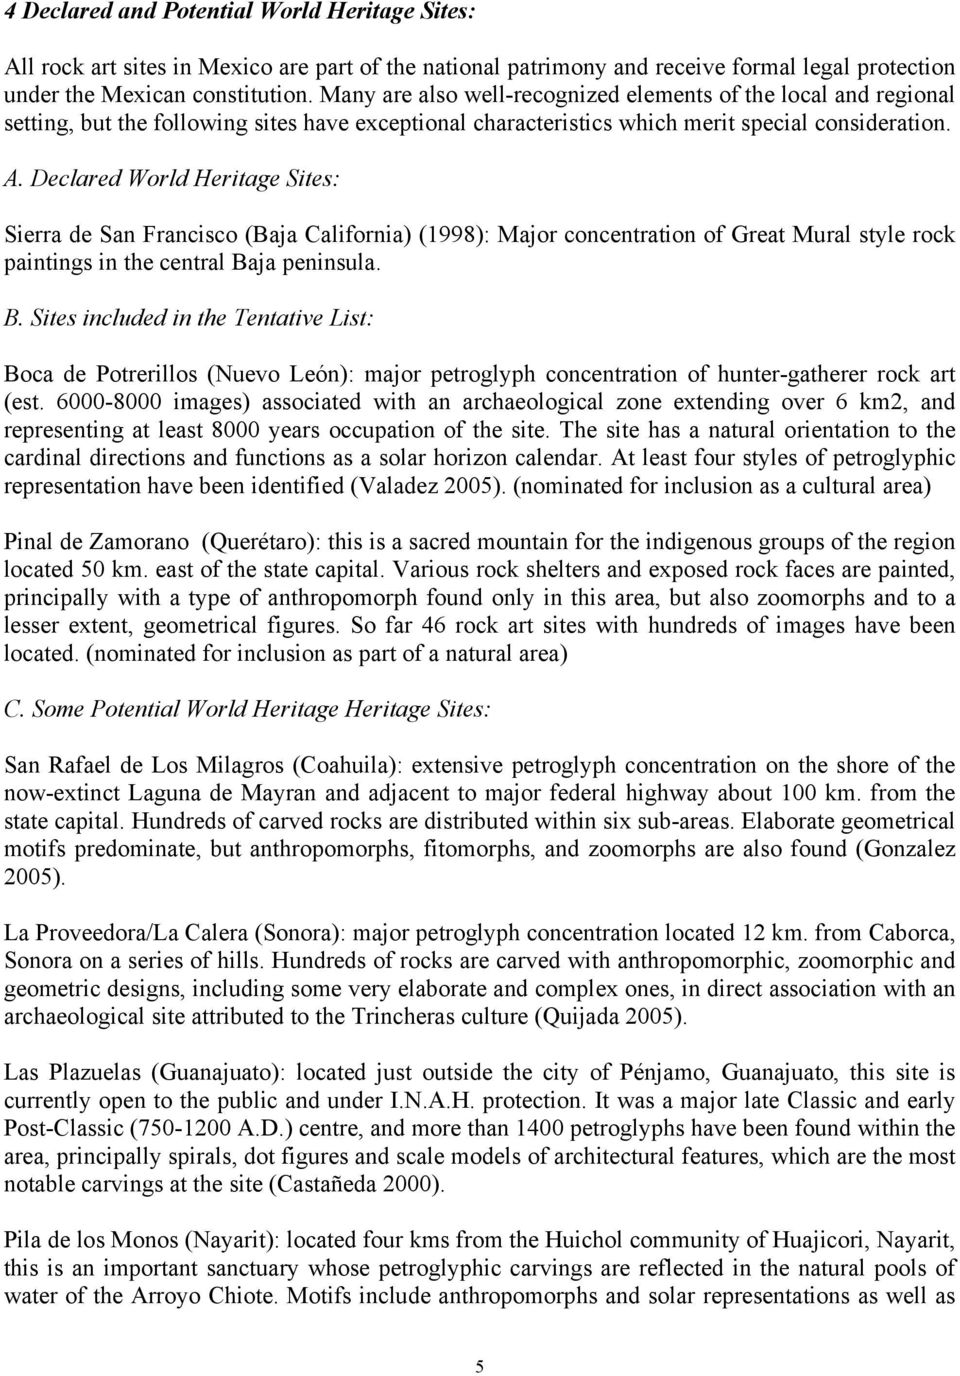 Declared World Heritage Sites: Sierra de San Francisco (Baja California) (1998): Major concentration of Great Mural style rock paintings in the central Ba